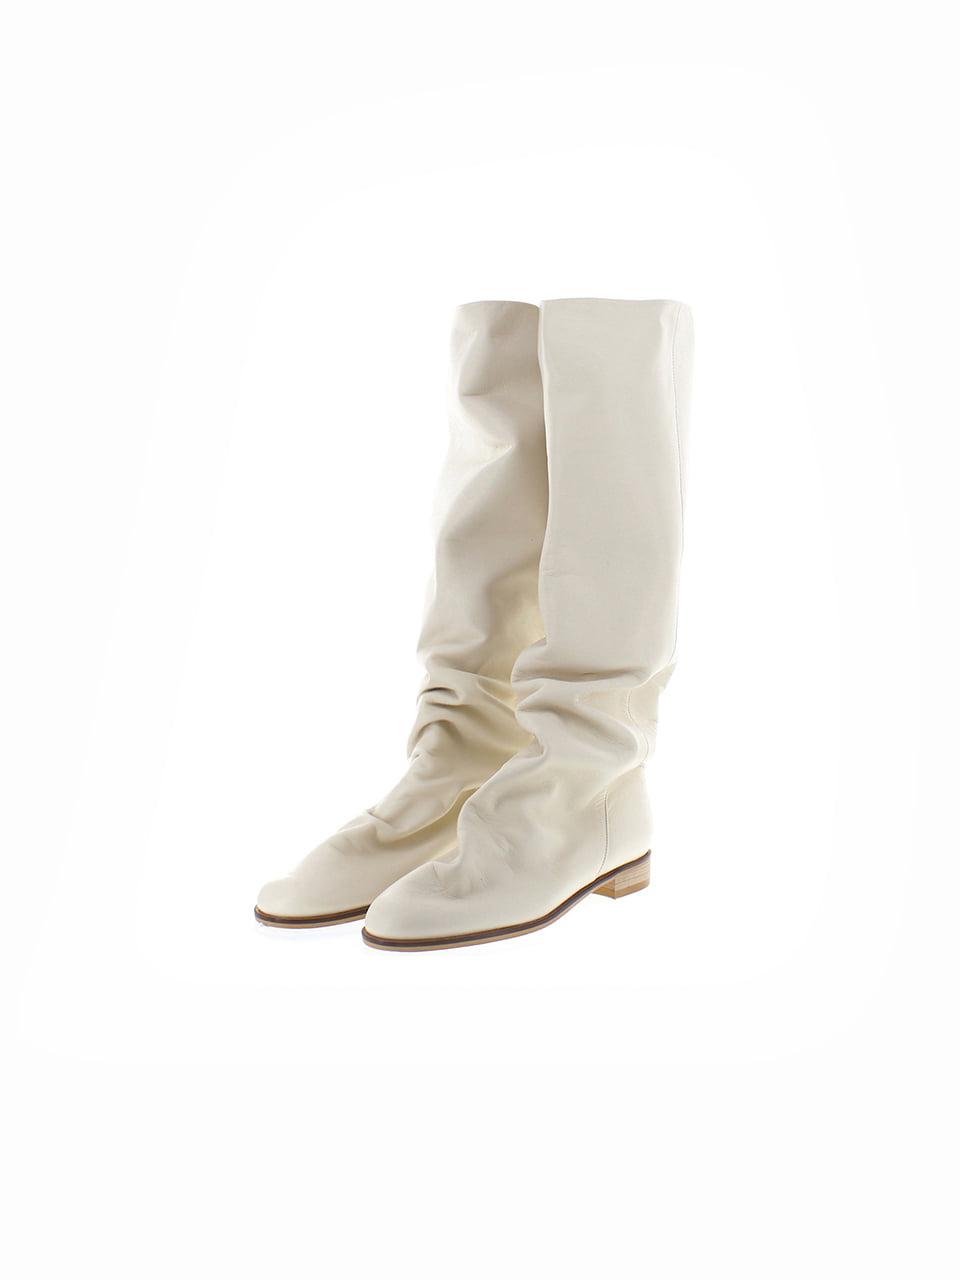 point_wrinkle long boots_ivory_20503